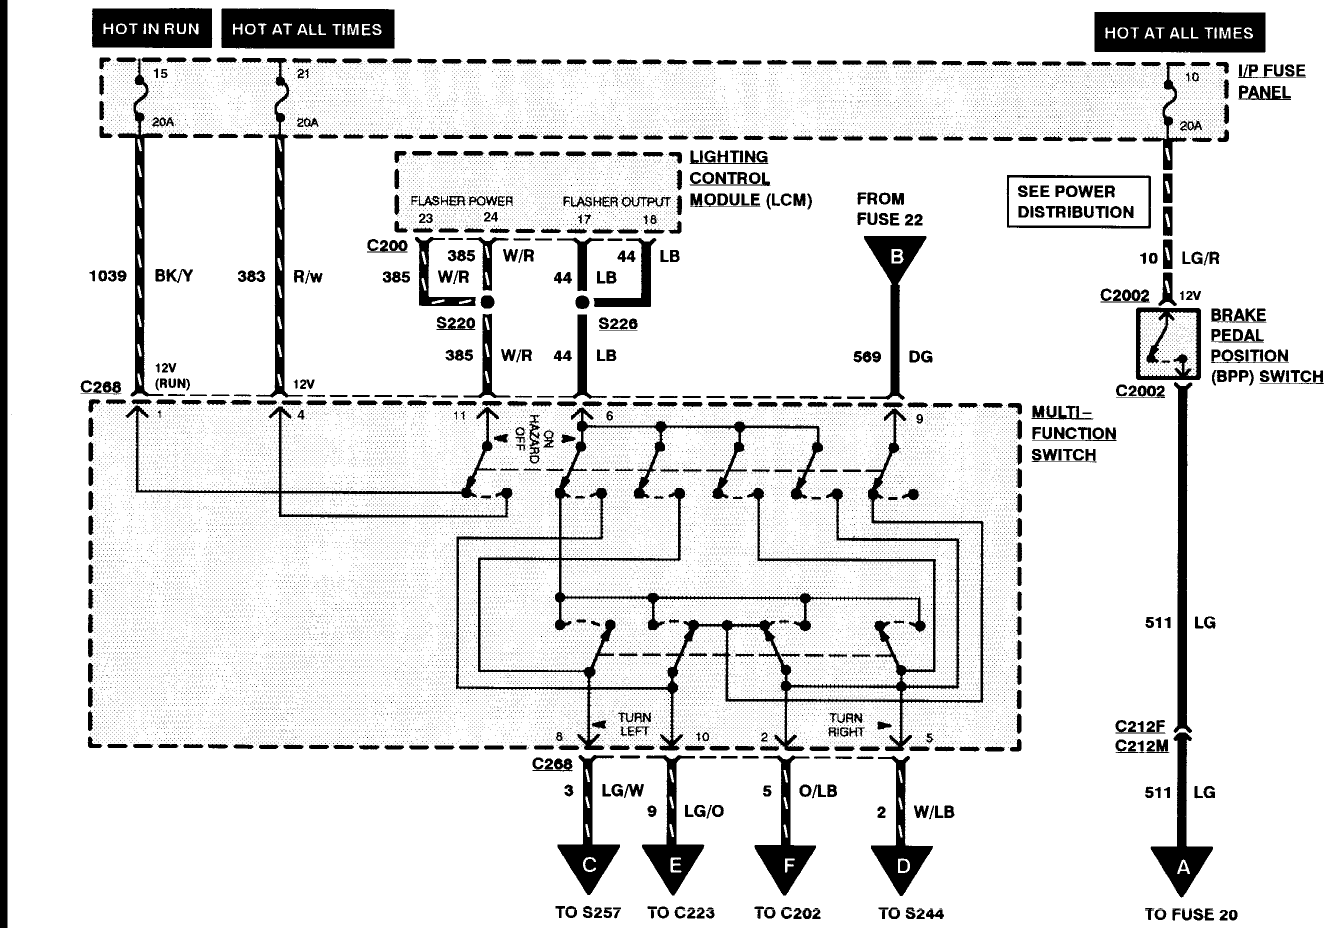 schematics and diagrams: Directional signals and flashers quit working